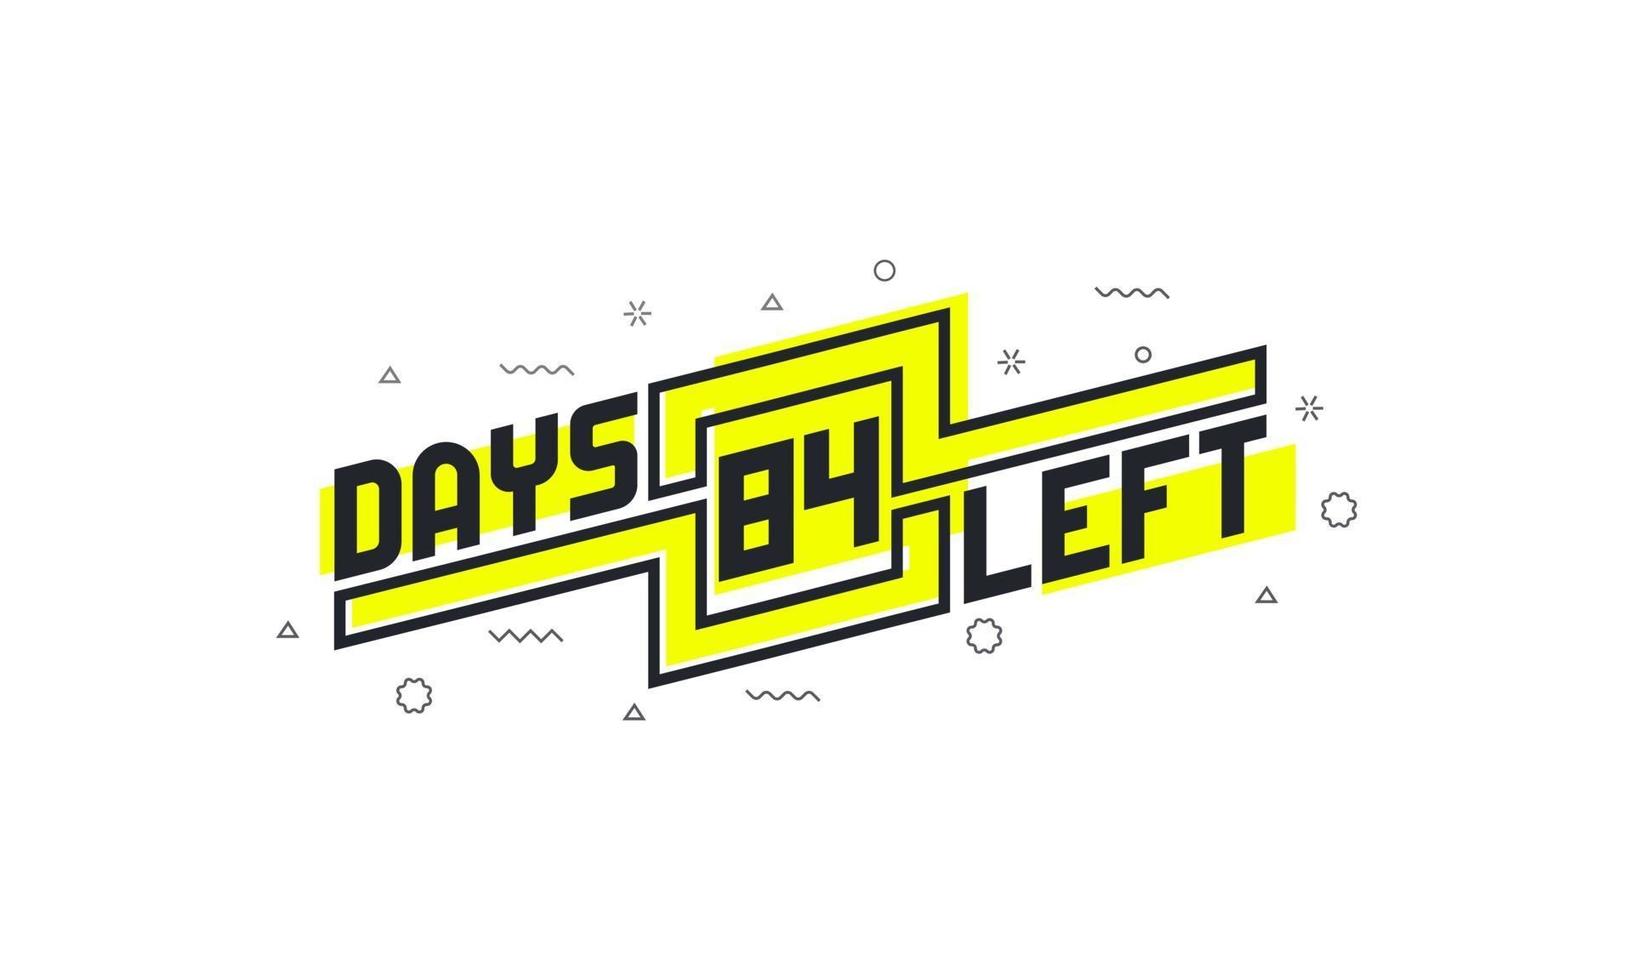 84 days left countdown sign for sale or promotion. vector